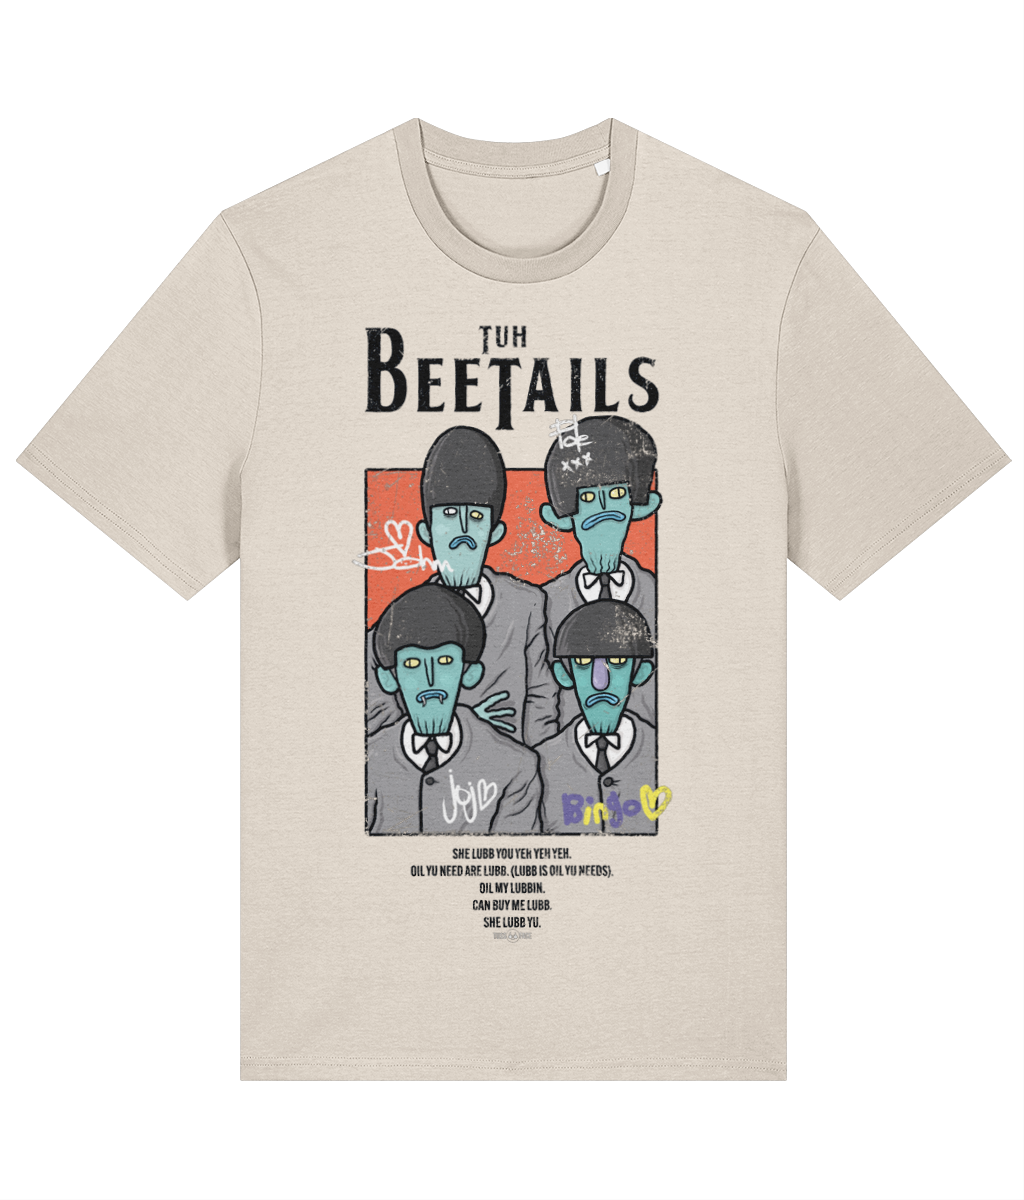 Tuh Beetails - TussFace T-shirt